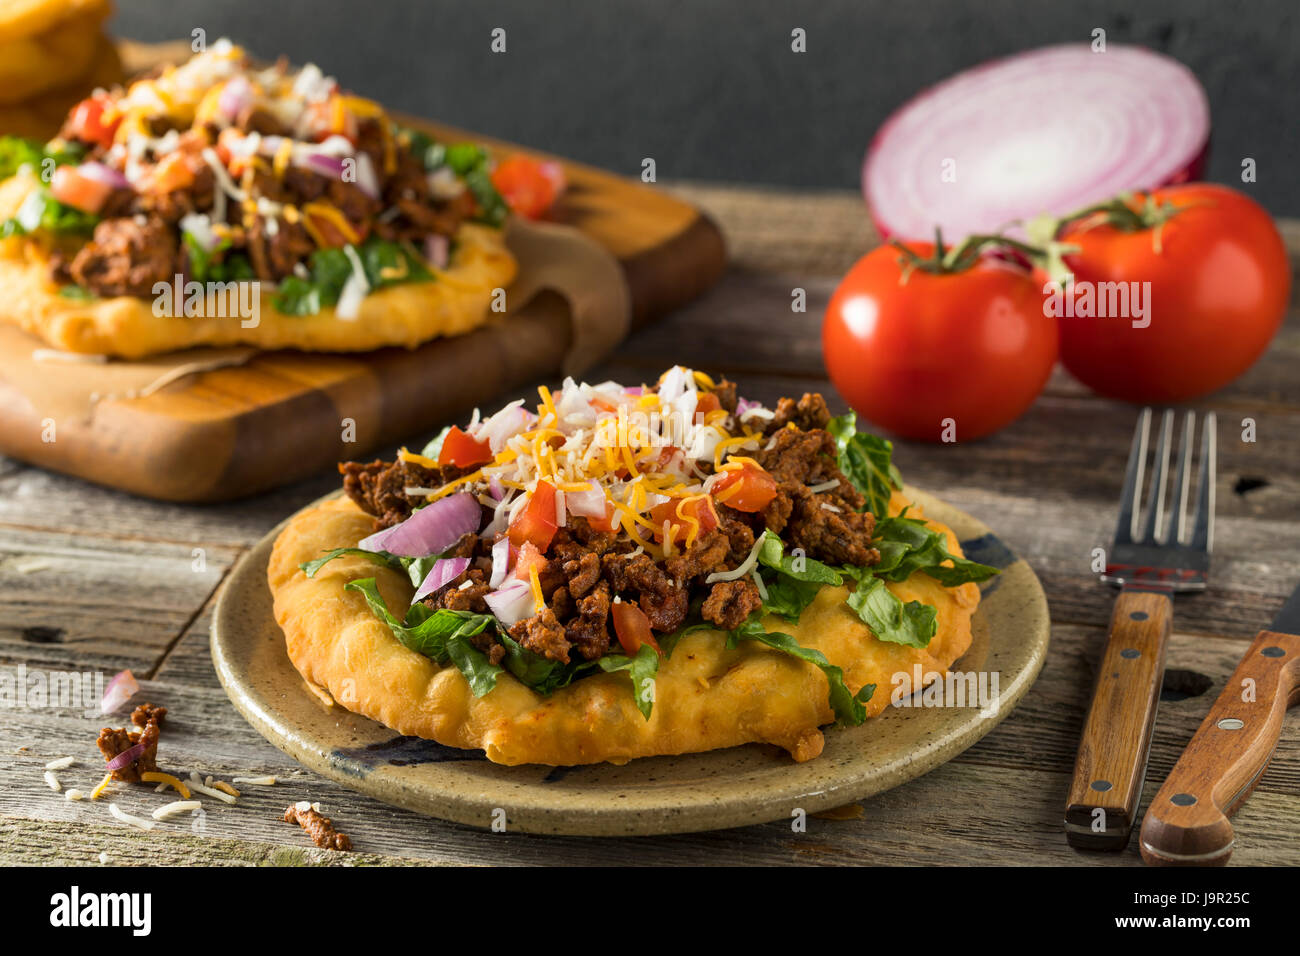 Homemade Indian Fry Bread Tacos with Ground Beef Lettuce and Tomato Stock Photo